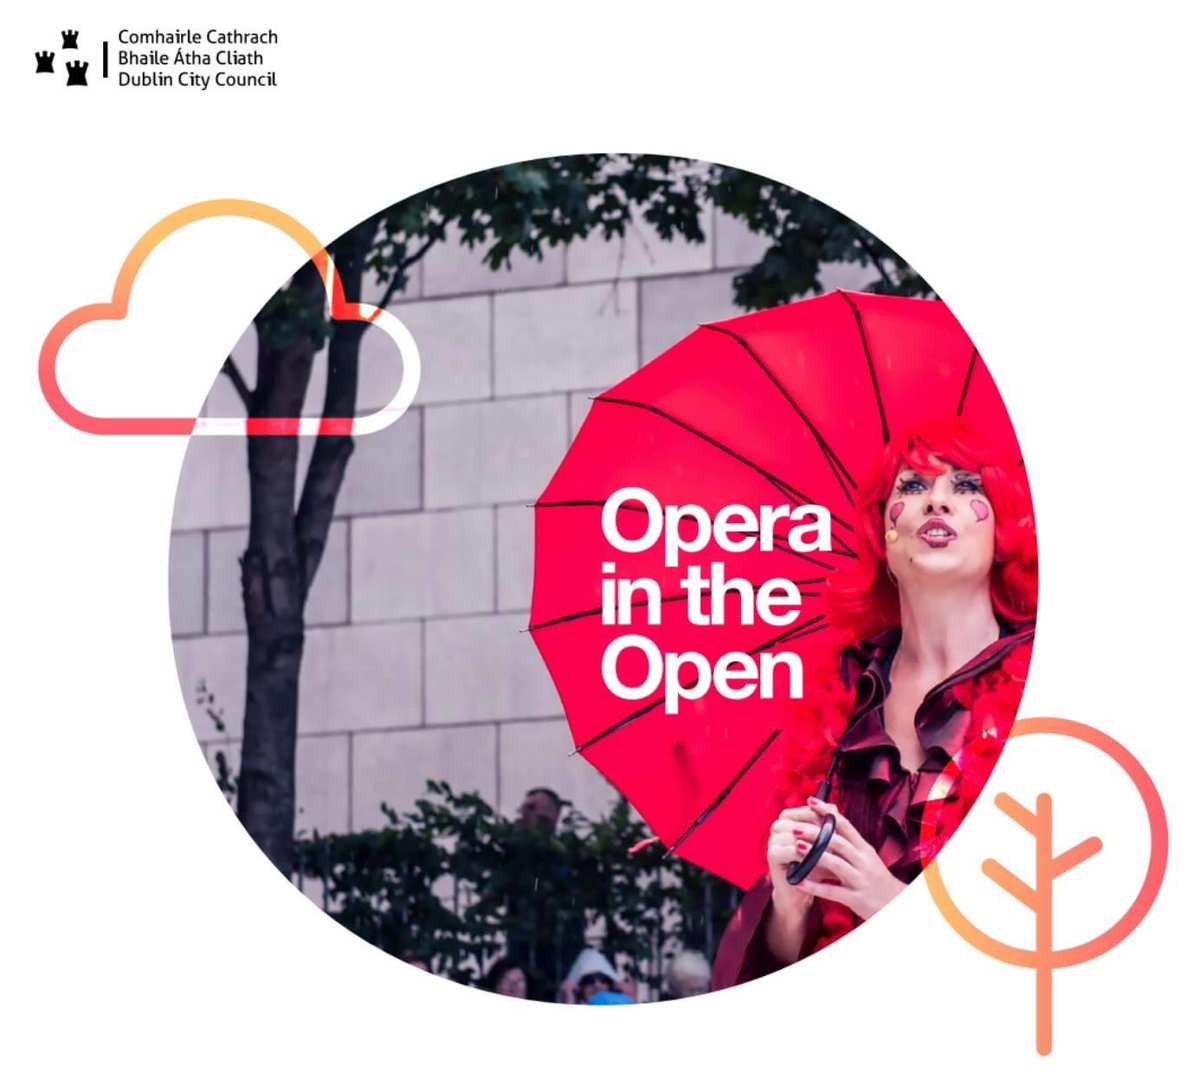 Currently watching #OperaintheOpen cast knocking it our of the park (no pun intended!) in Le Nozze di Figaro! So great to hear you all! Superb singing @SylviaOBrienSop @brenbaritone @Sarah_Richmond_ @KelliAnnMasters @SimonMorganIRL! 🎶 

facebook.com/operaintheopen…